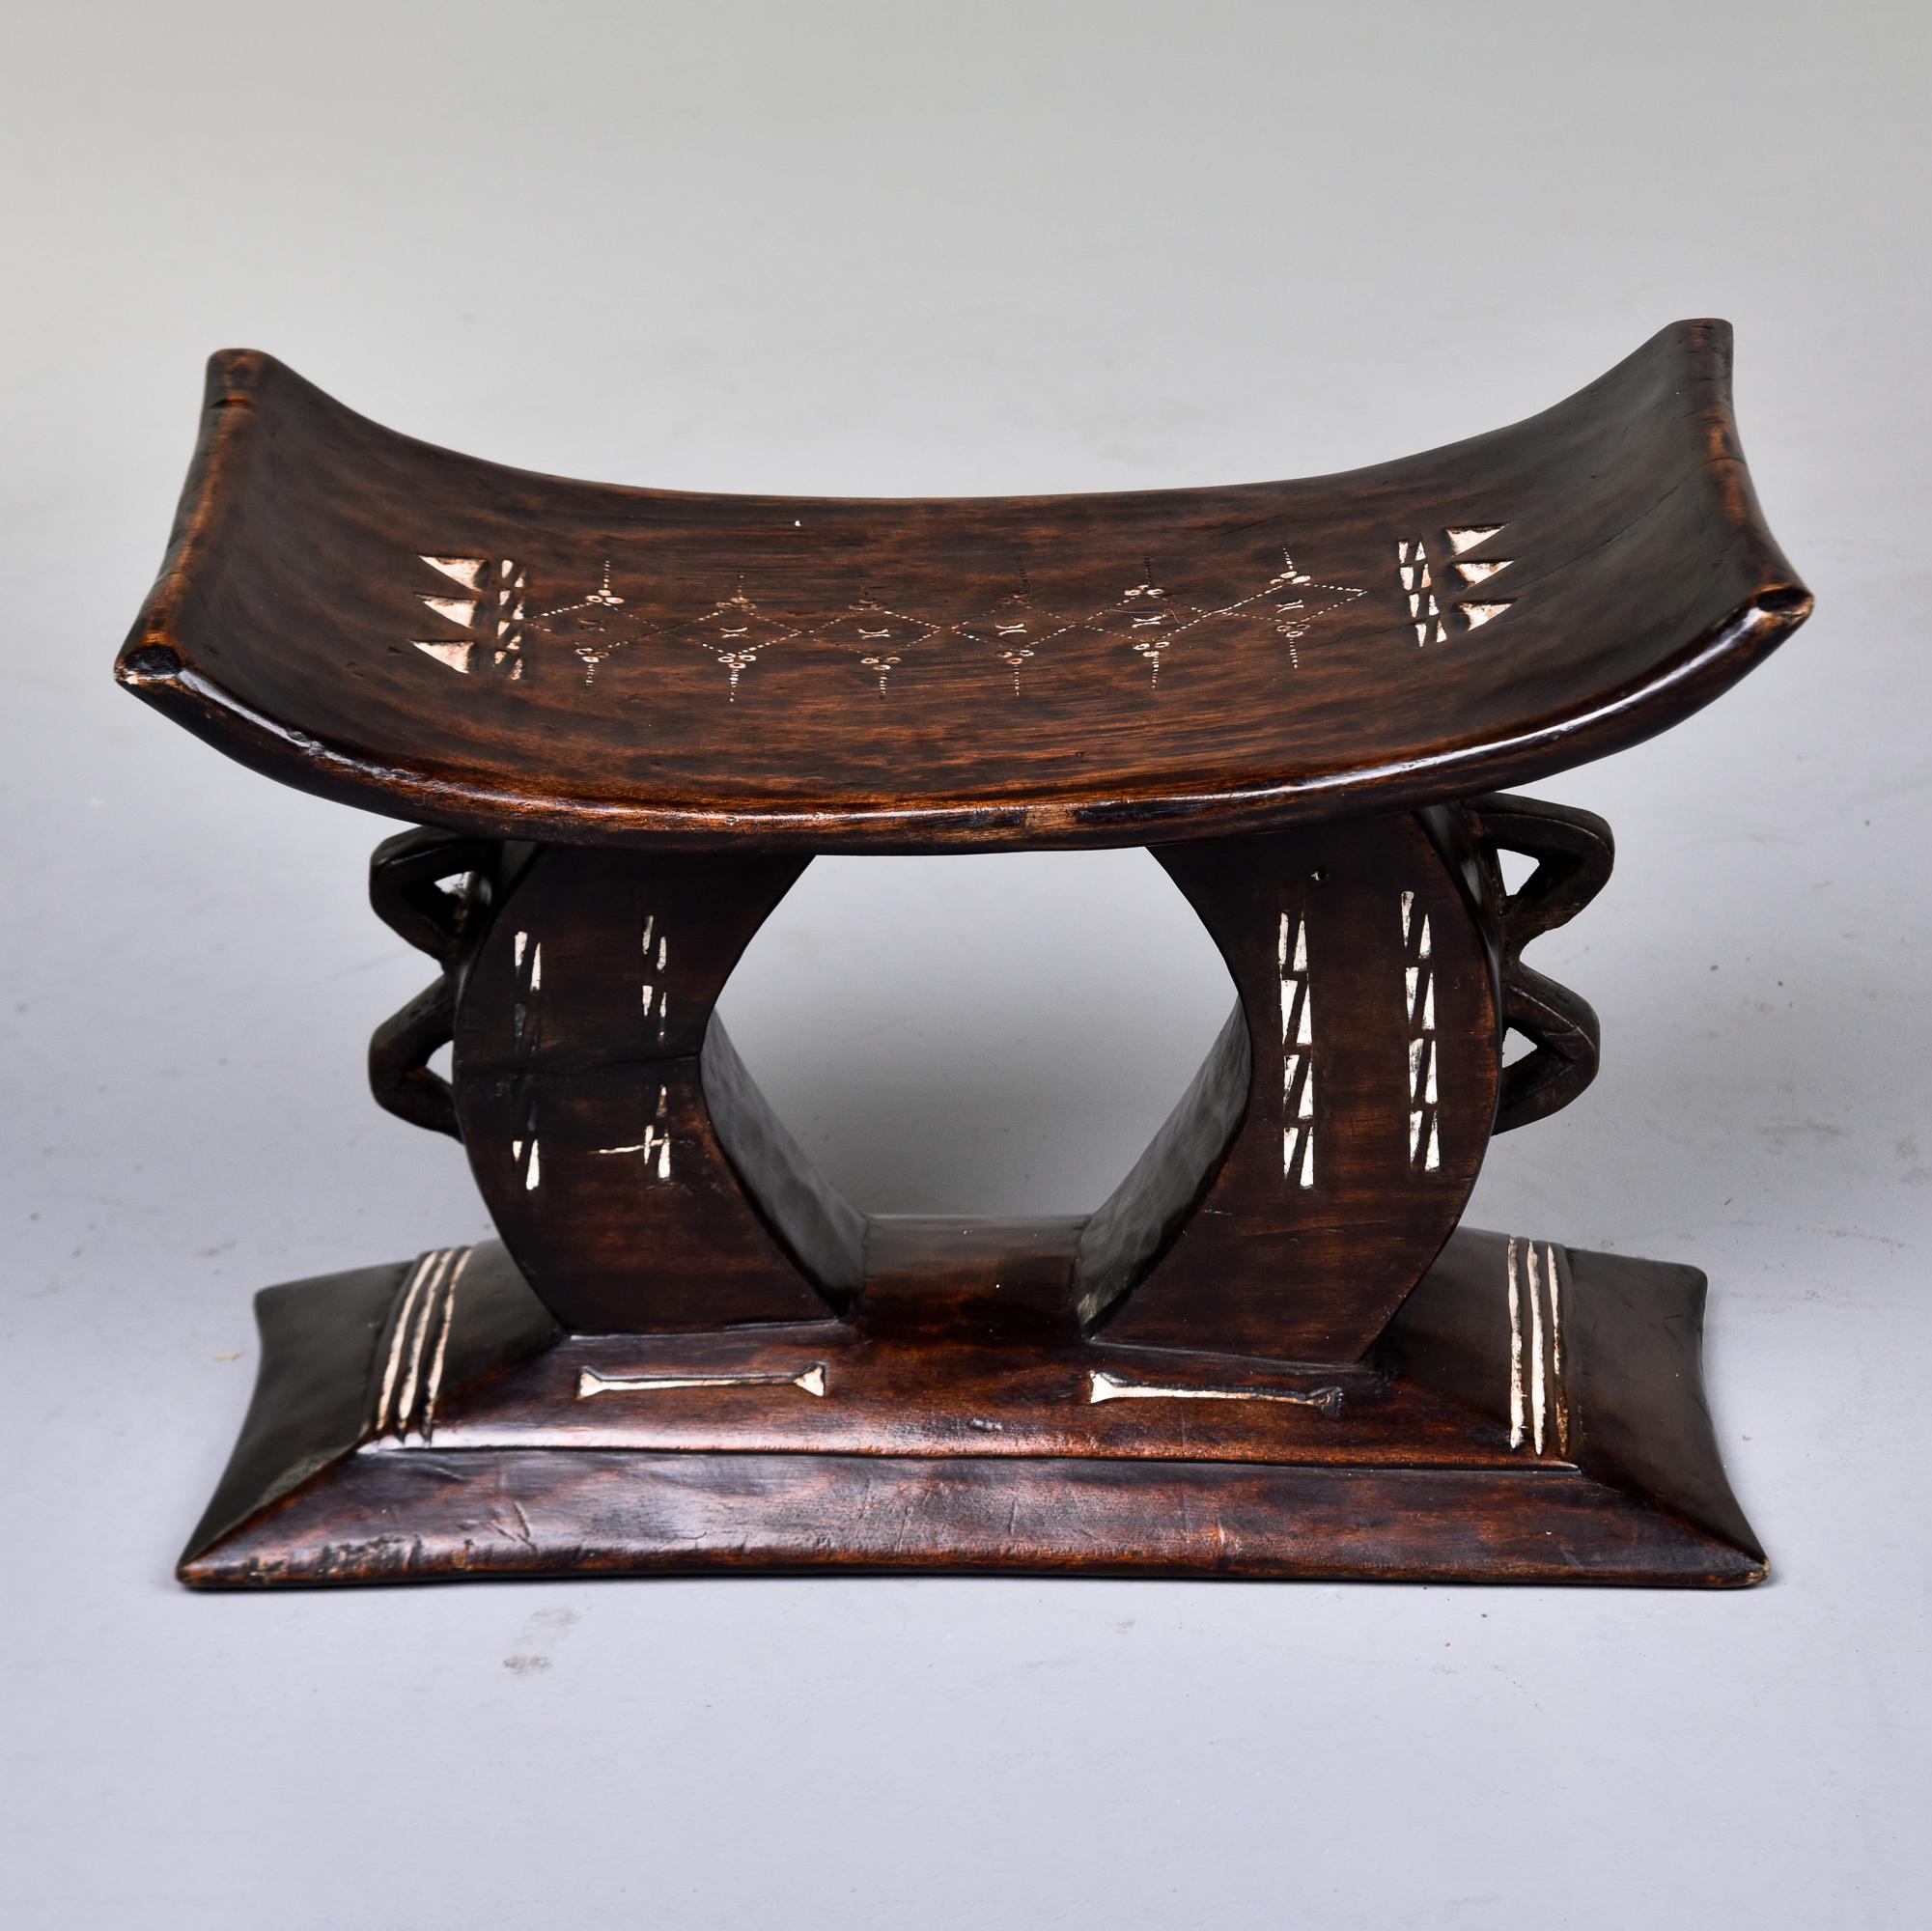 This Ashanti carved stool dates from the 1980s and was found in Ghana. Hand carved and crafted from a single piece of wood, this stool has white painted and etched detailed design on the seat and base. Unknown wood type is dense and sturdy with a